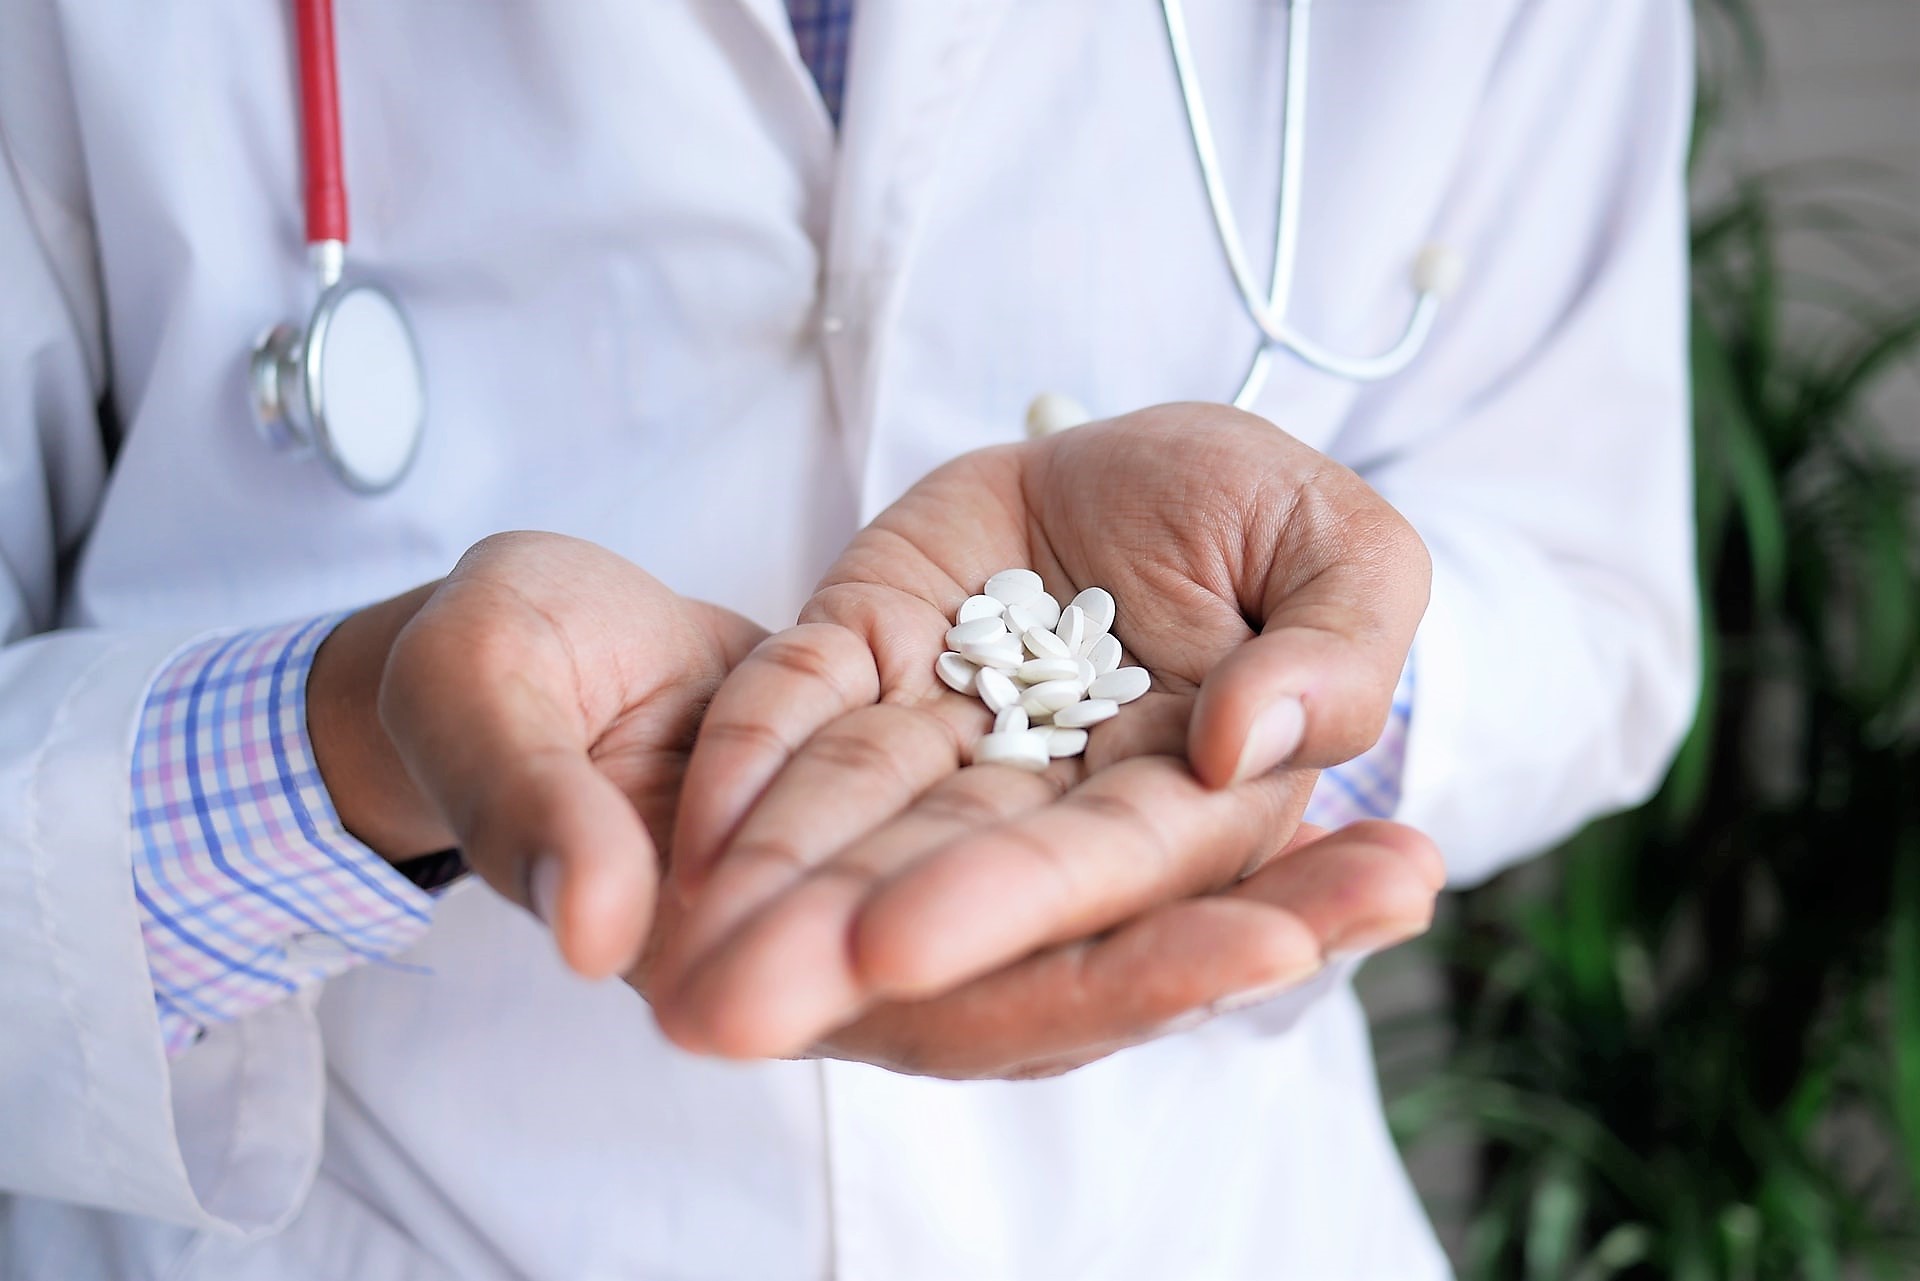 Photograph of a doctor holding out small white pills